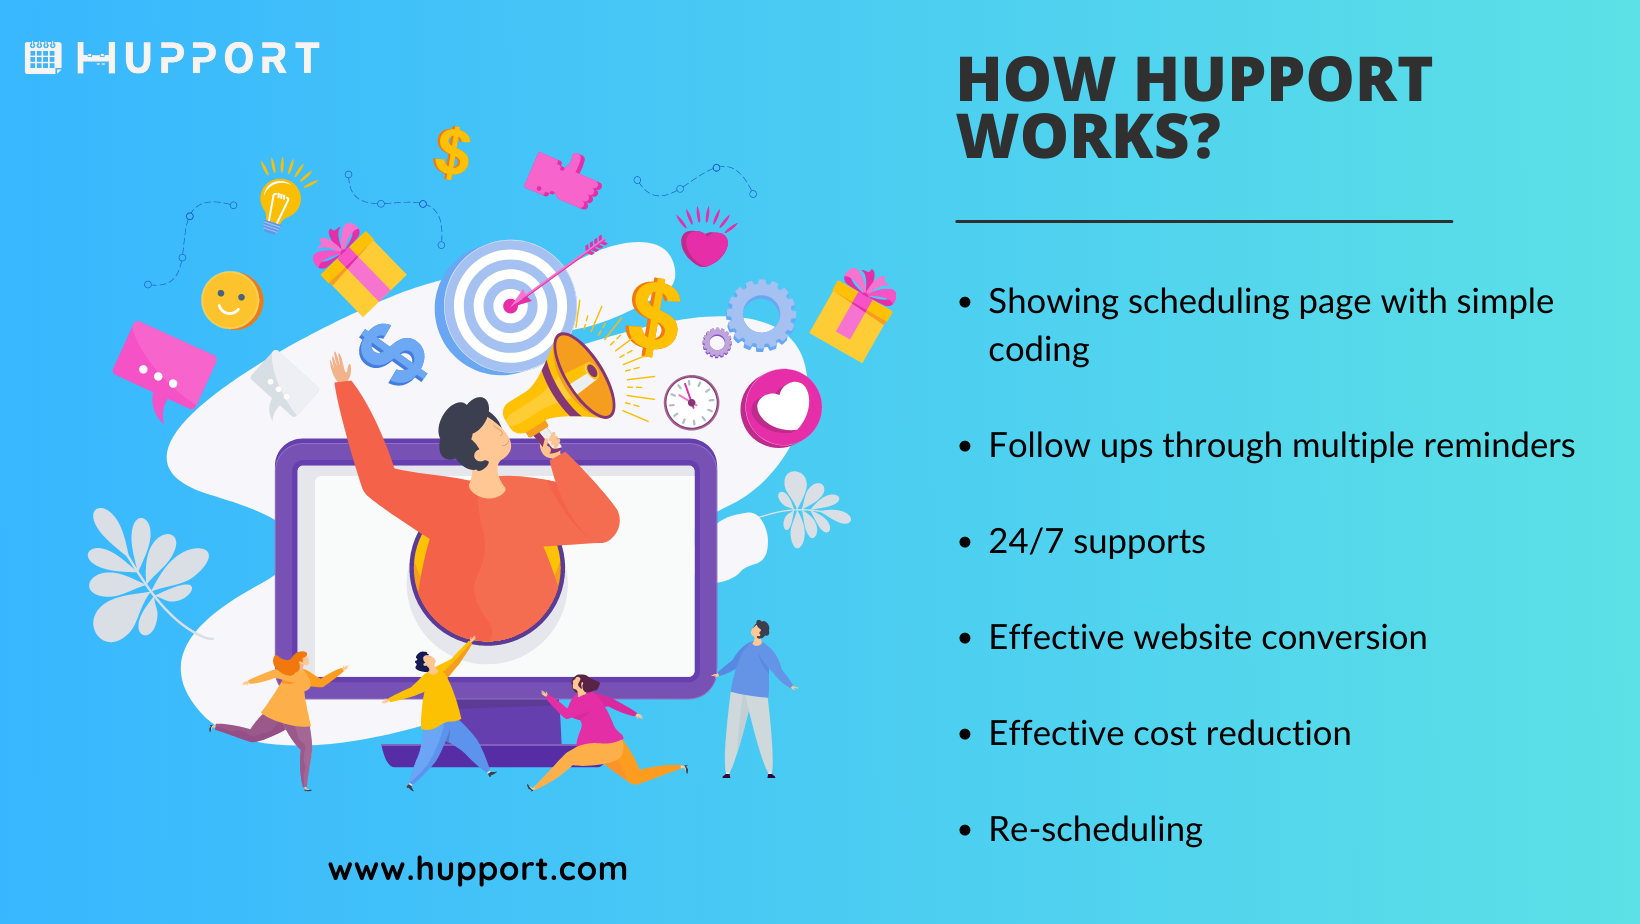 How Hupport works?